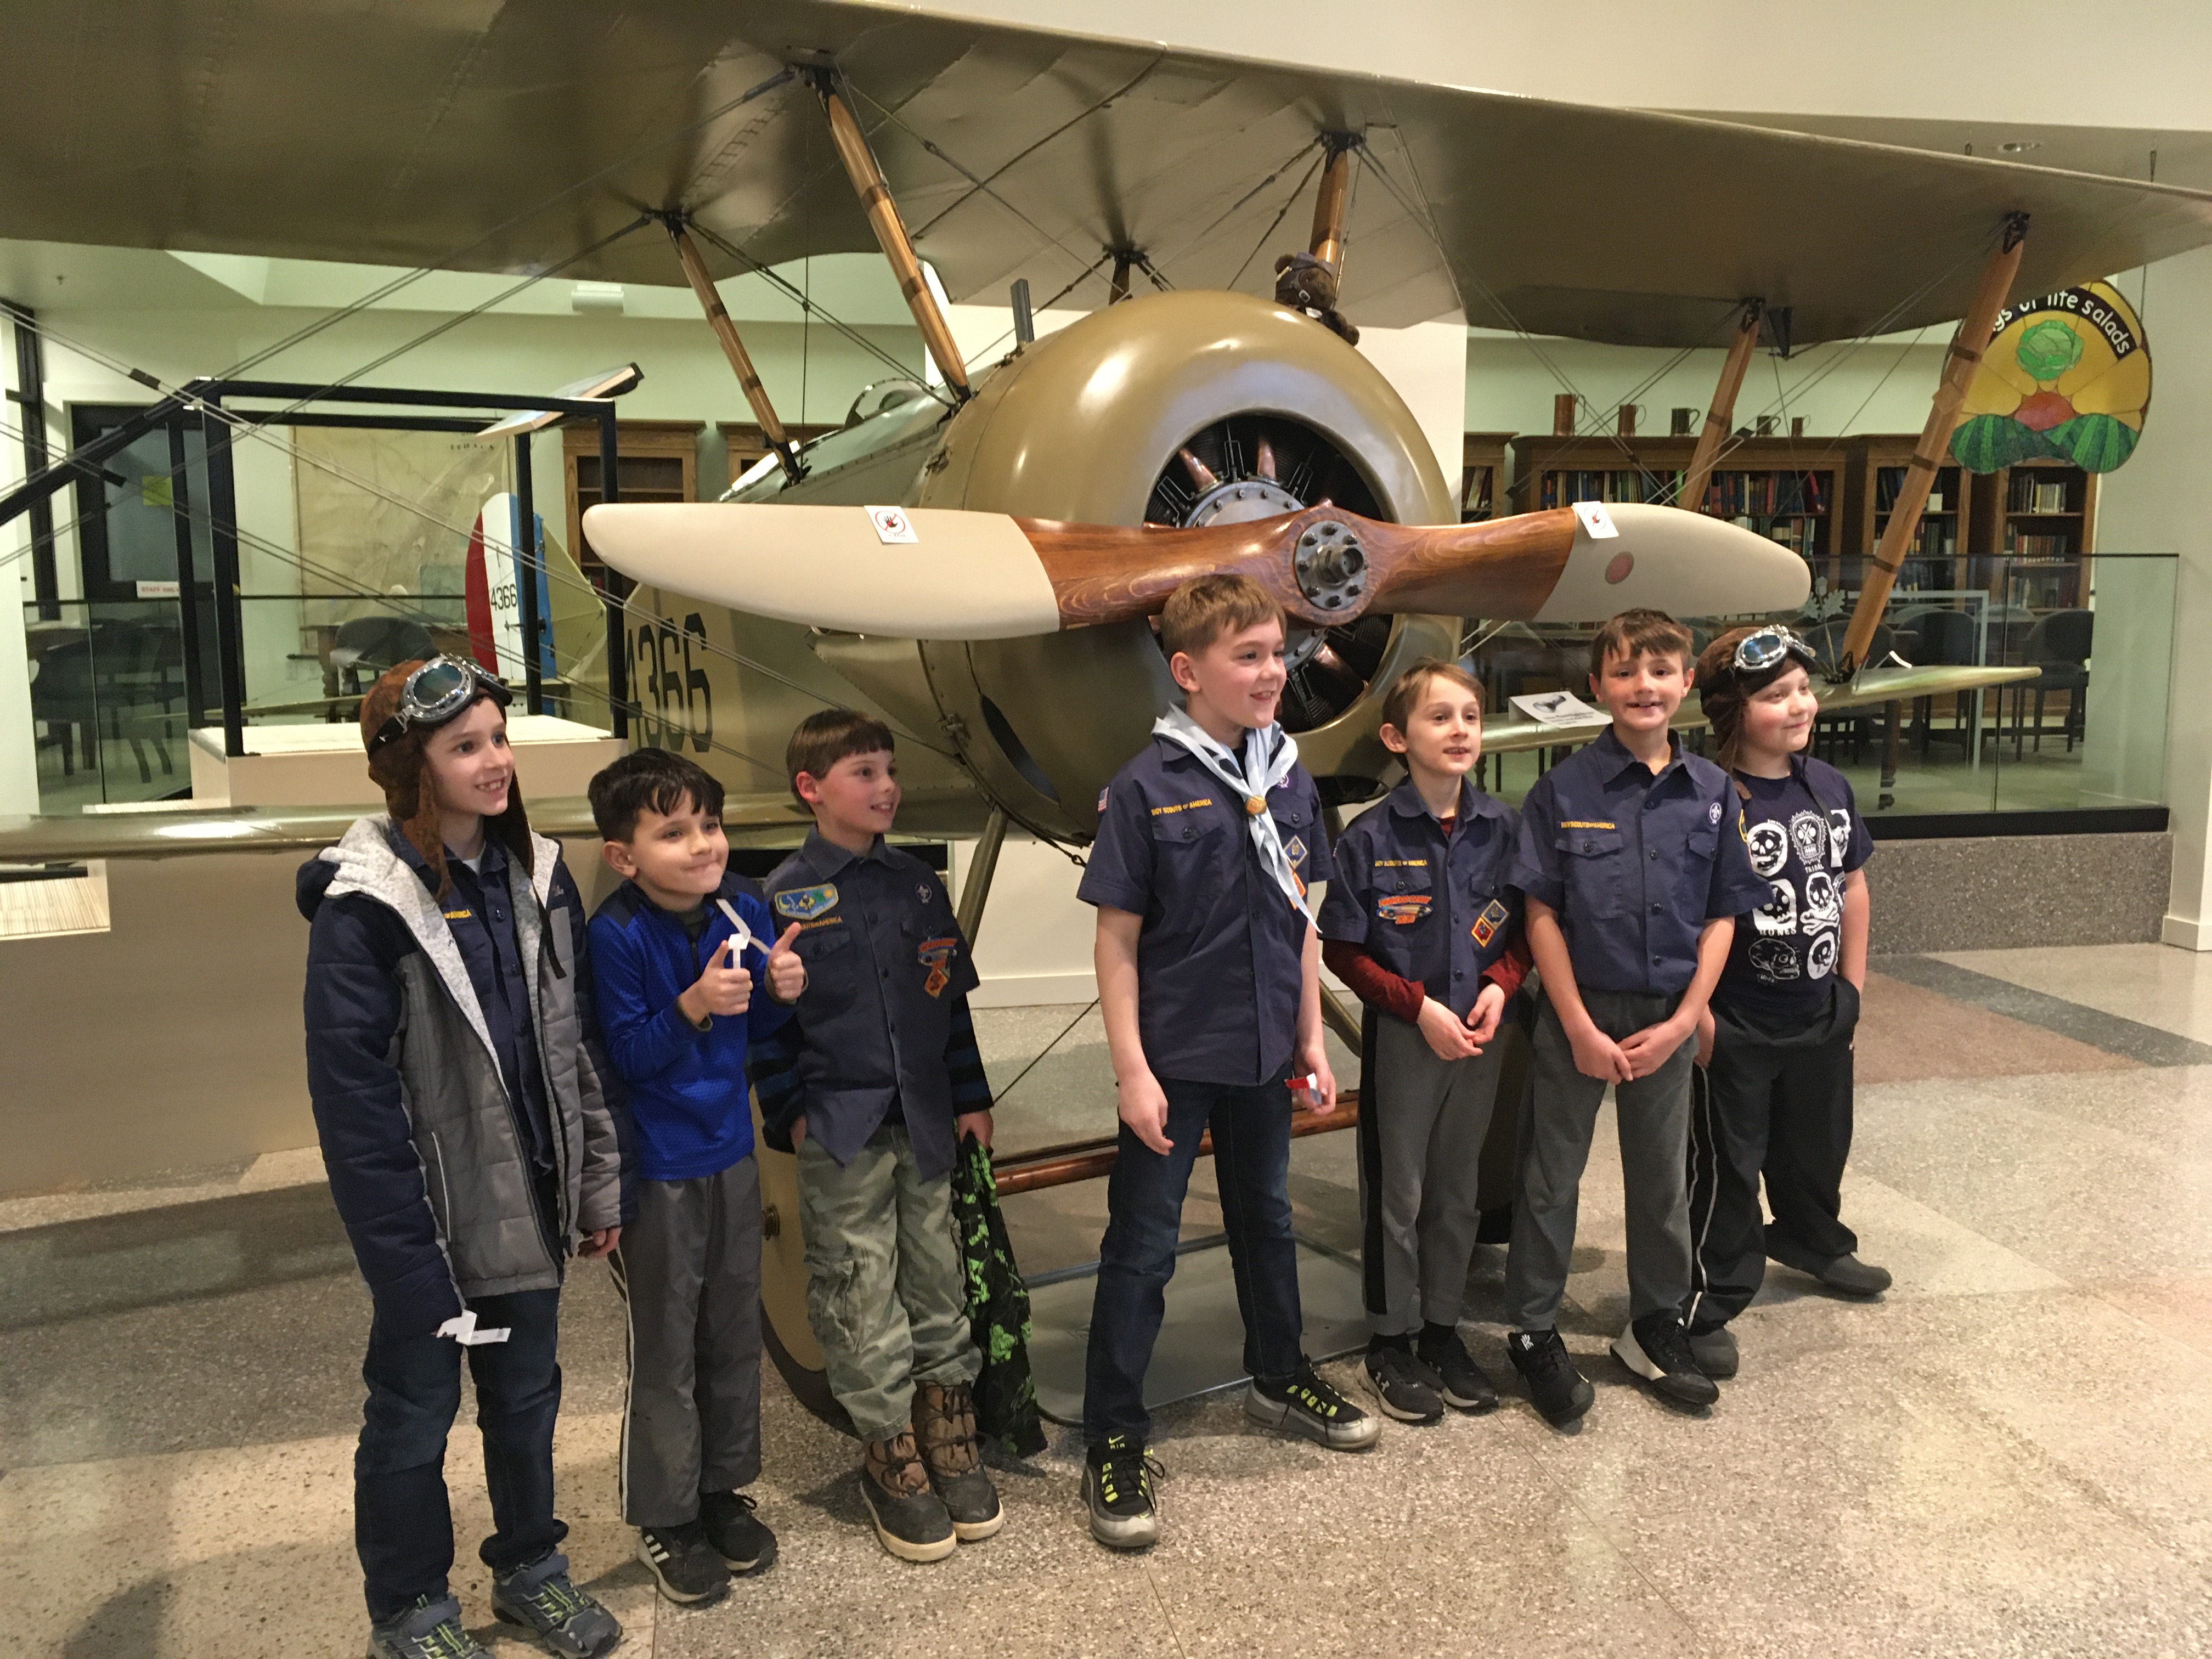 A photo of a group of children standing in front of the Tommy Plane.